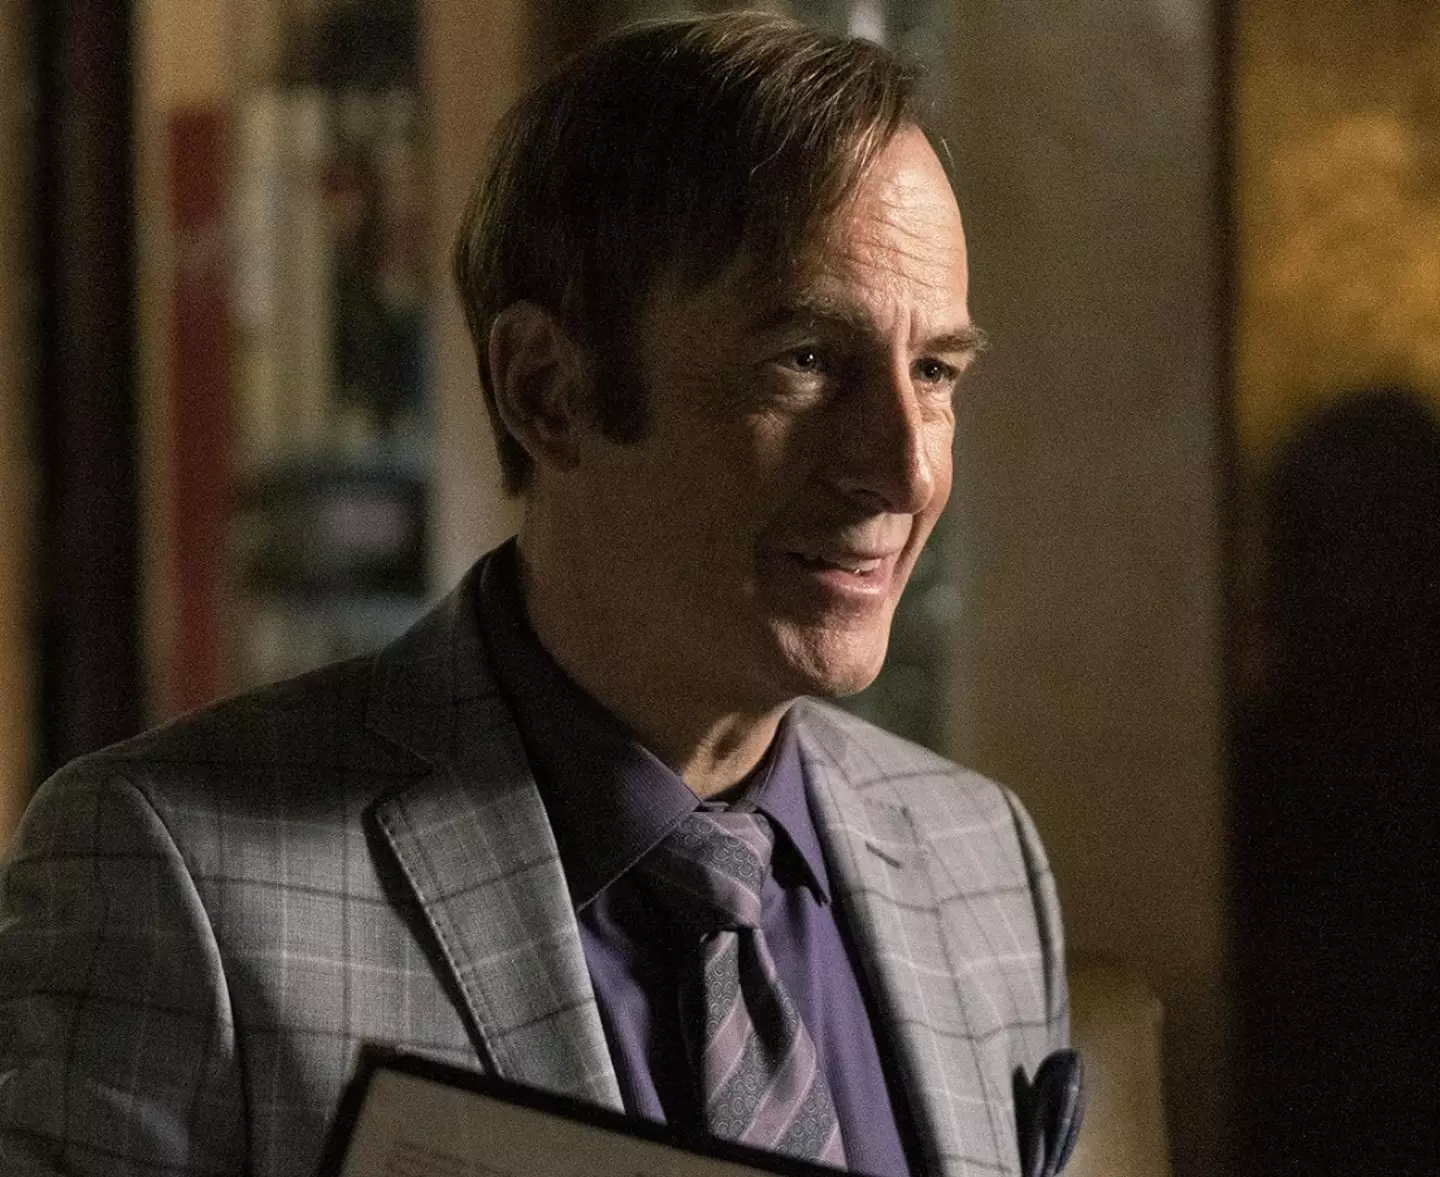 Bob Odenkirk stars as the lawyer in Better Call Saul.